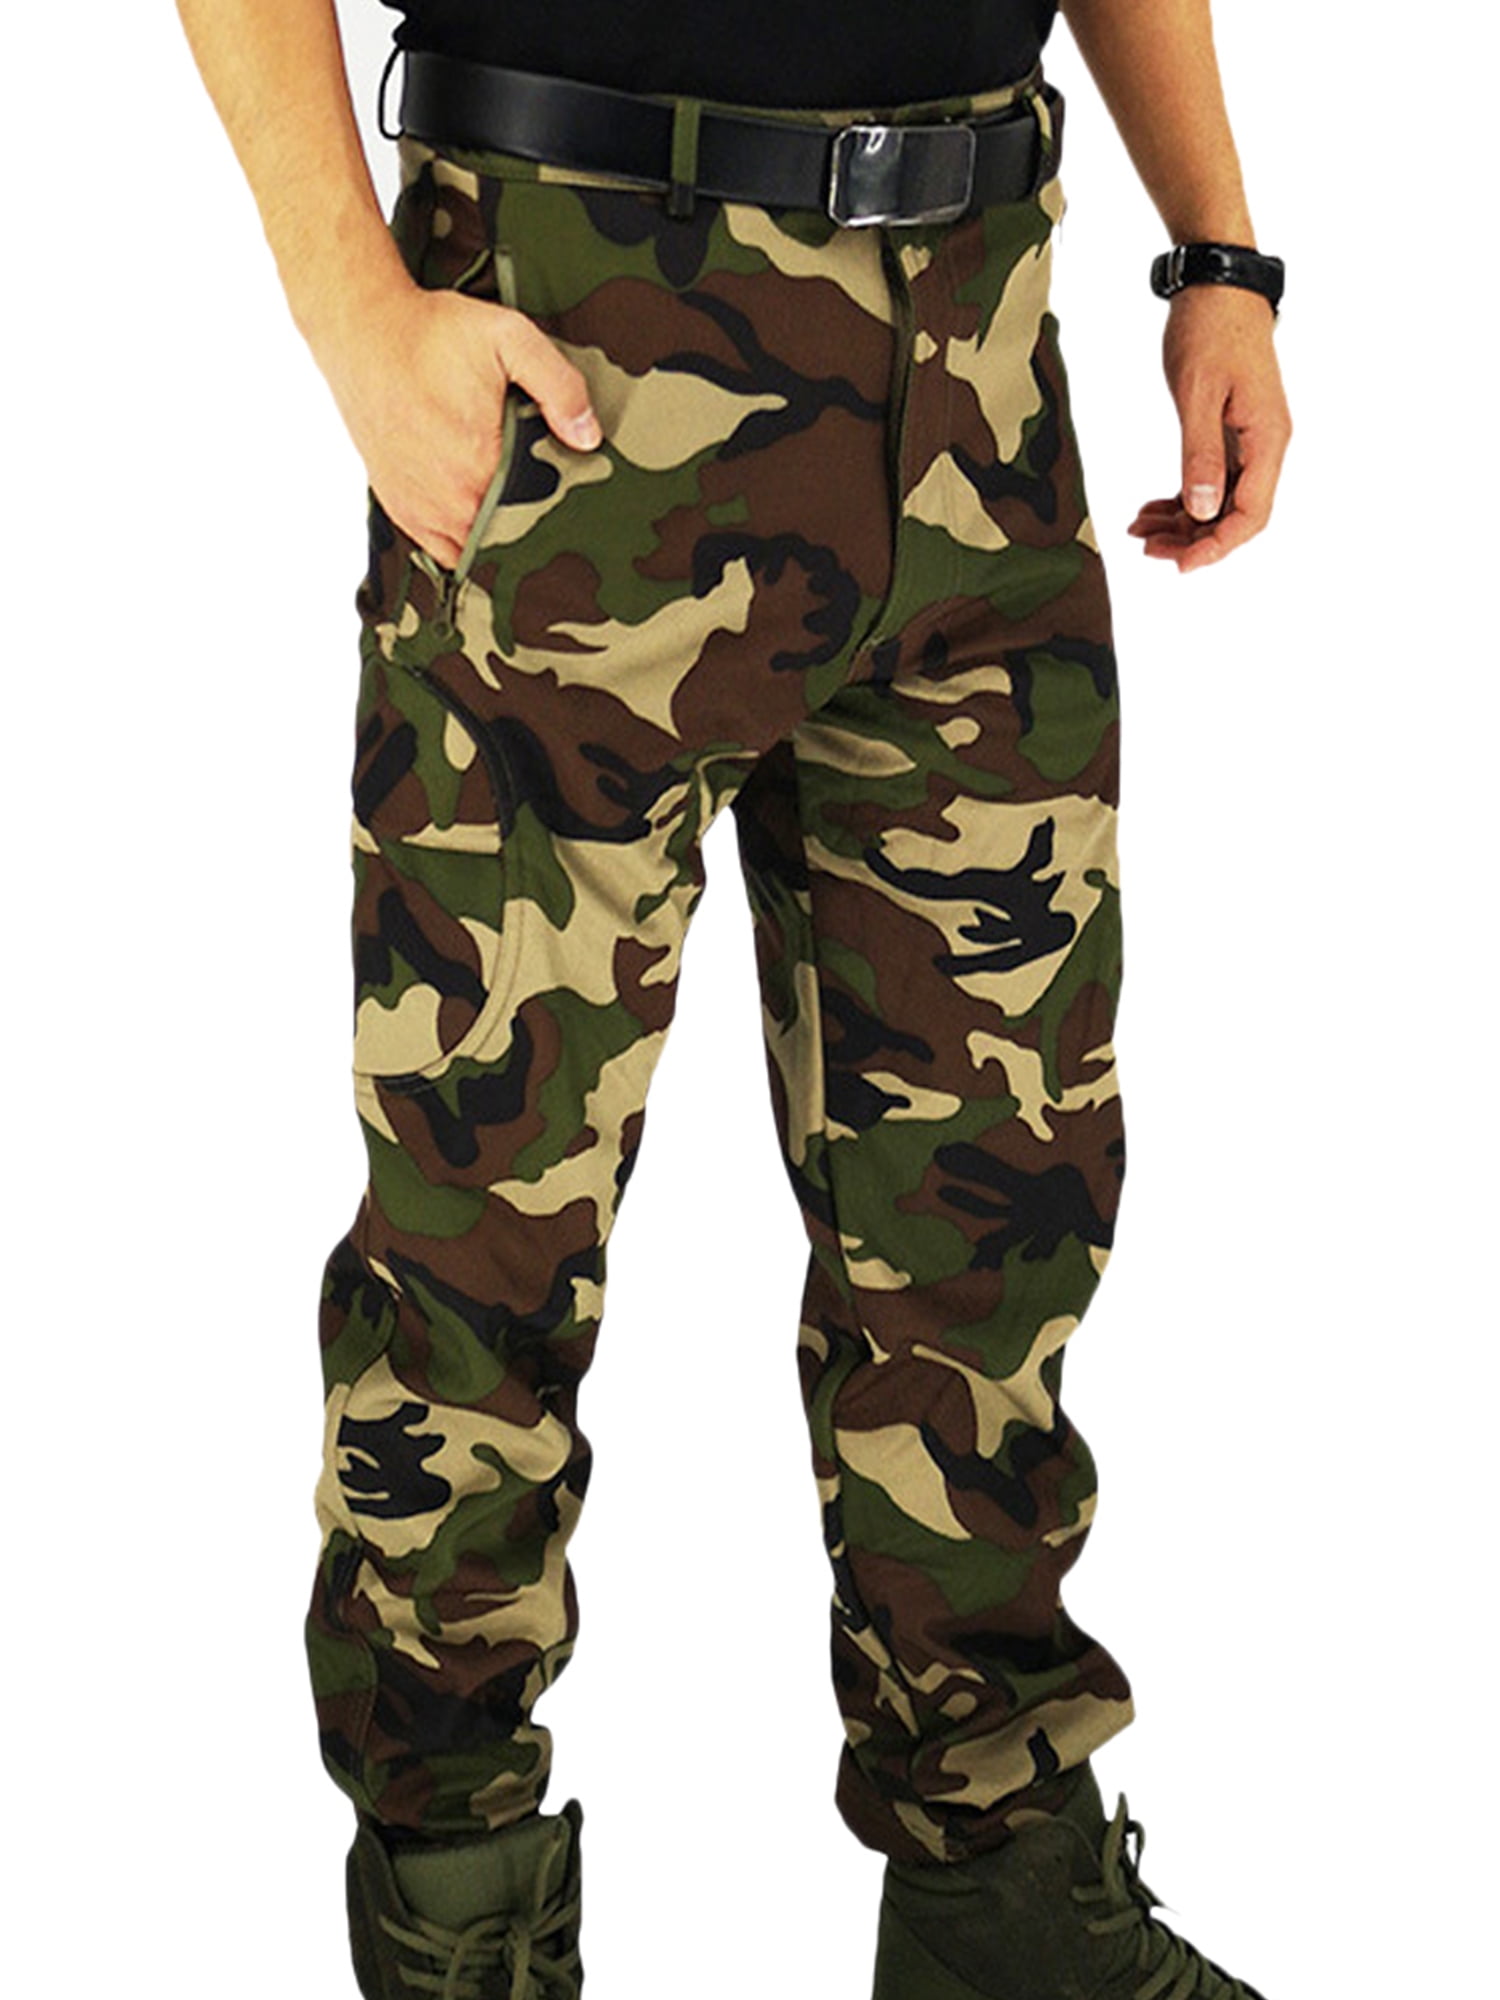 ARMY CARGO CAMO COMBAT MILITARY MENS TROUSERS PANTS CAMOUFLAGE SLACKS CASUAL 